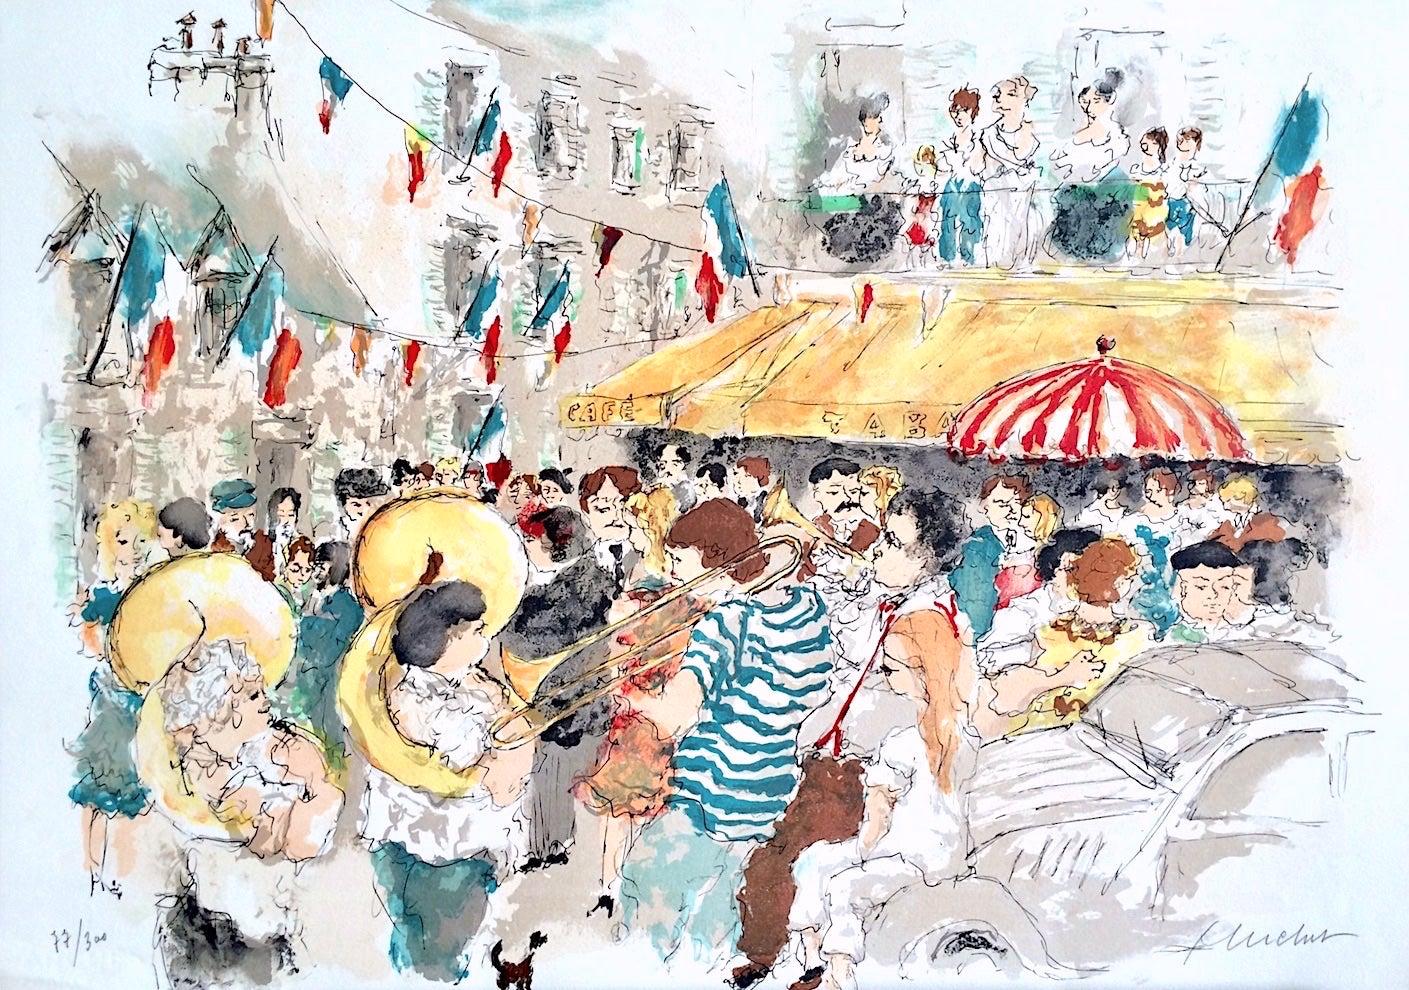 BASTILLE DAY PARIS Signed Lithograph, French Street Celebration, Brass Band 